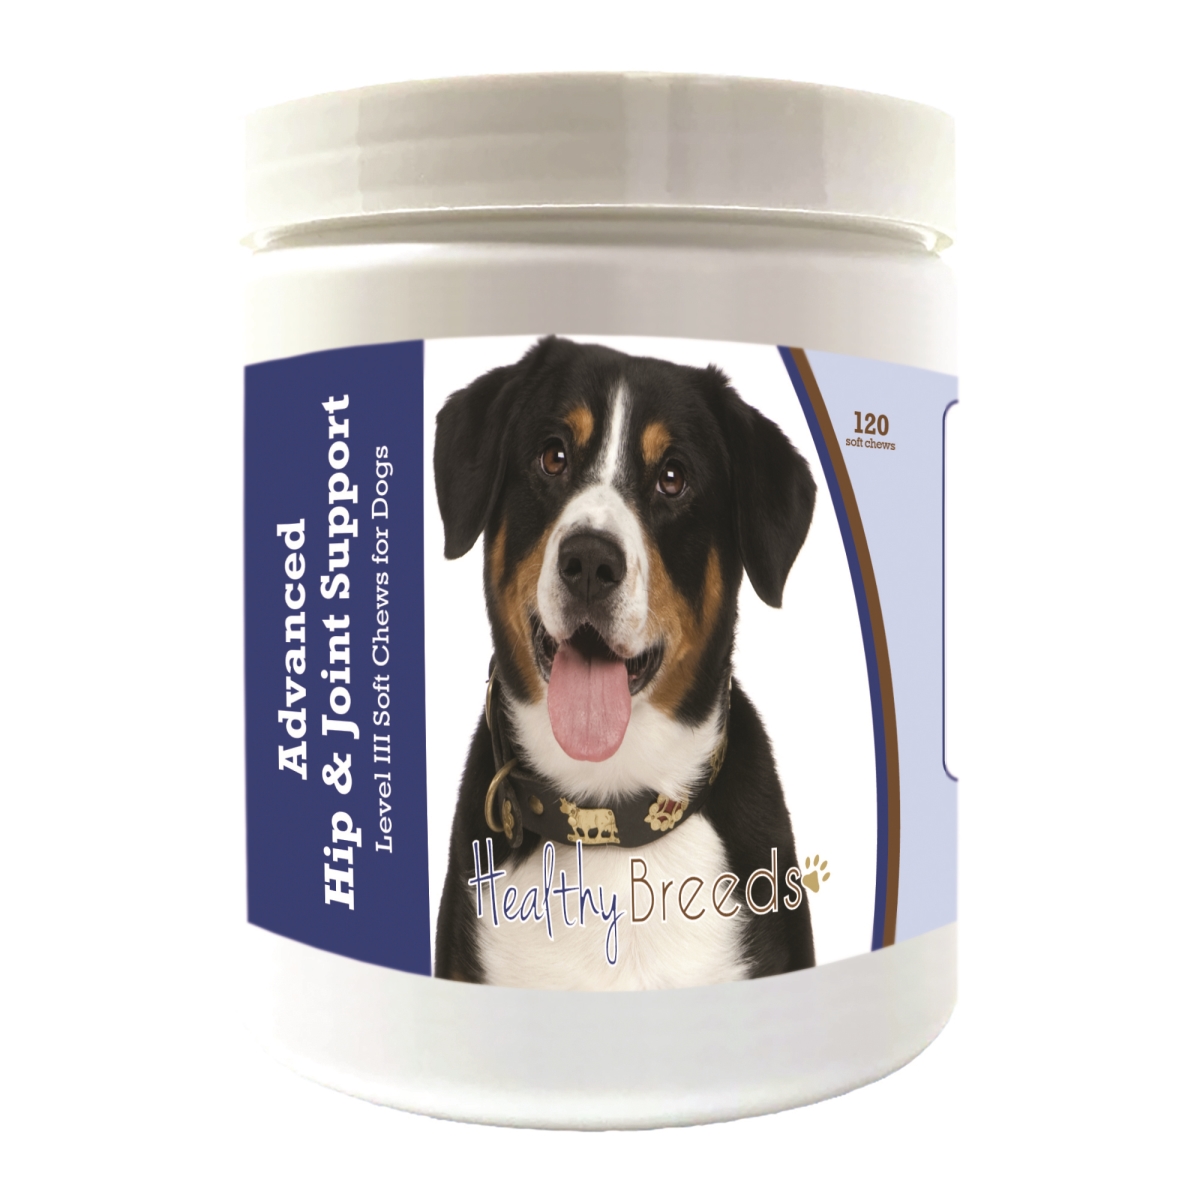 Picture of Healthy Breeds 192959898170 Entlebucher Mountain Dog Advanced Hip & Joint Support Level III Soft Chews for Dogs